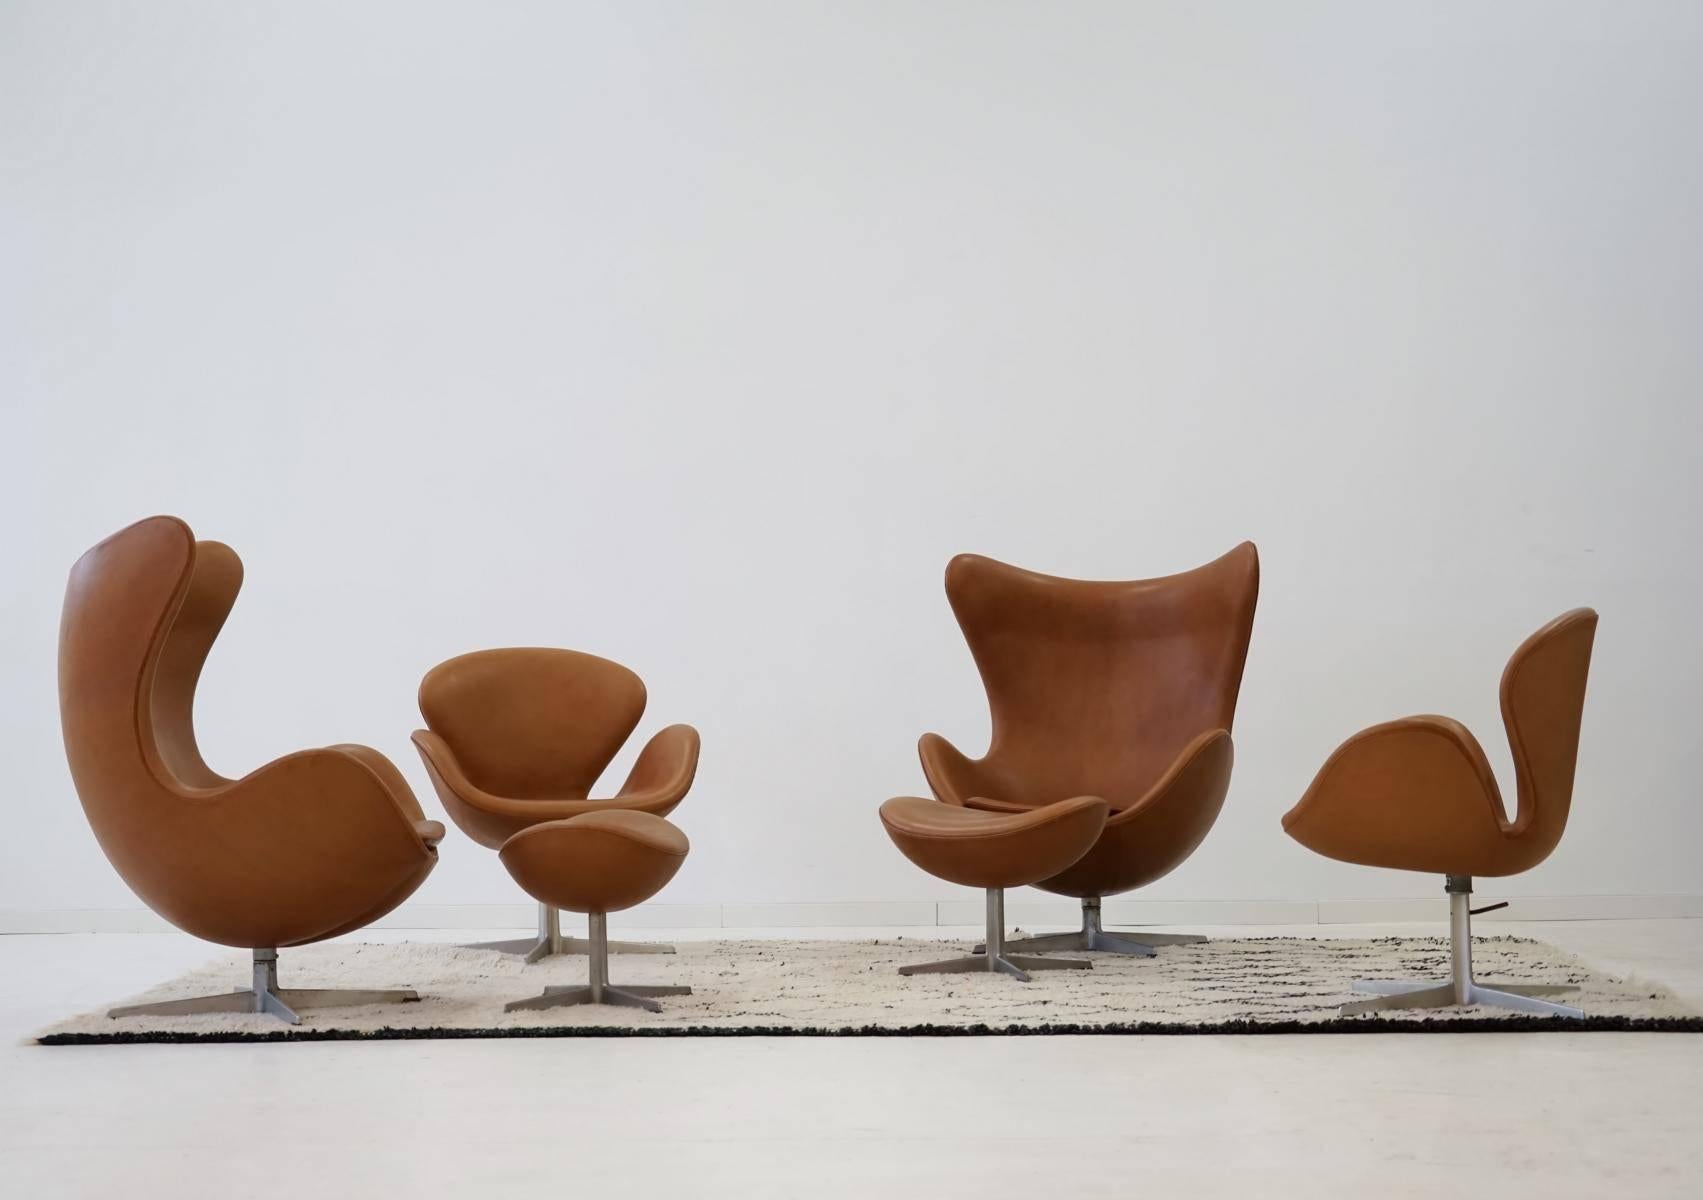 Egg chair with ottoman and Swan chair by Arne Jacobsen, Fritz Hansen in leather, 1960s
Set of two Egg chair and two ottoman from early production series. With old foot, swiveling. Two Swan chair with swiveling and height-adjustable feet.
The set